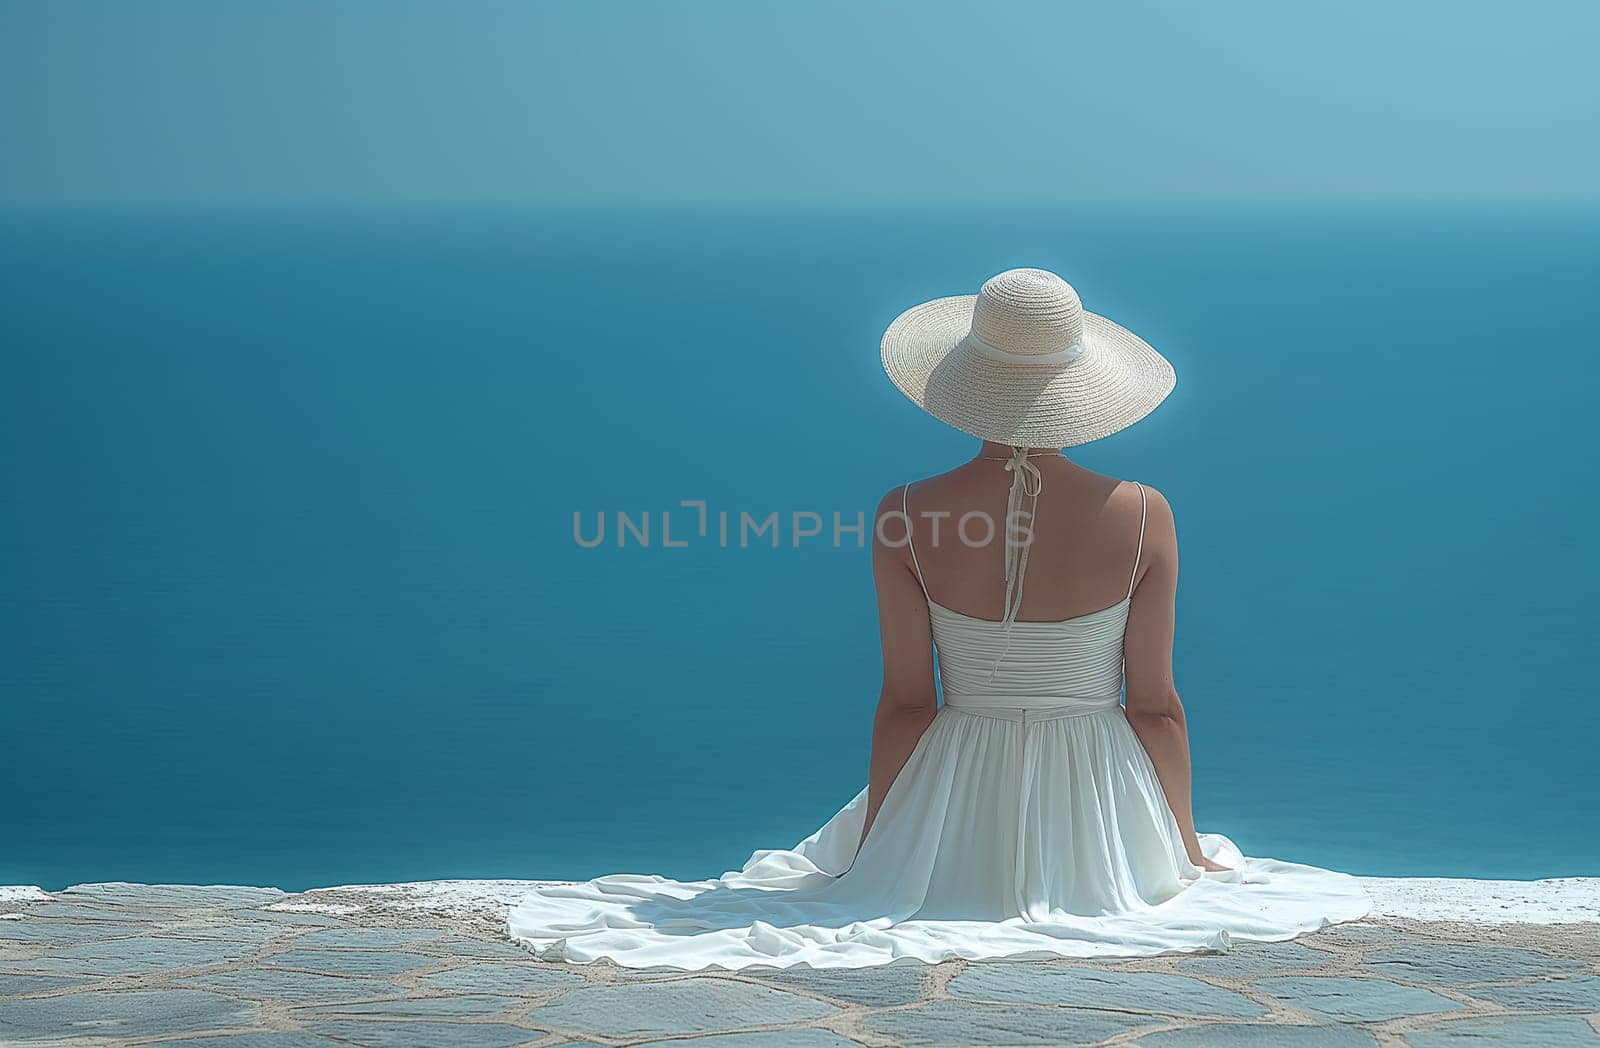 Woman in straw hat overlooking the sea on a sunny day.